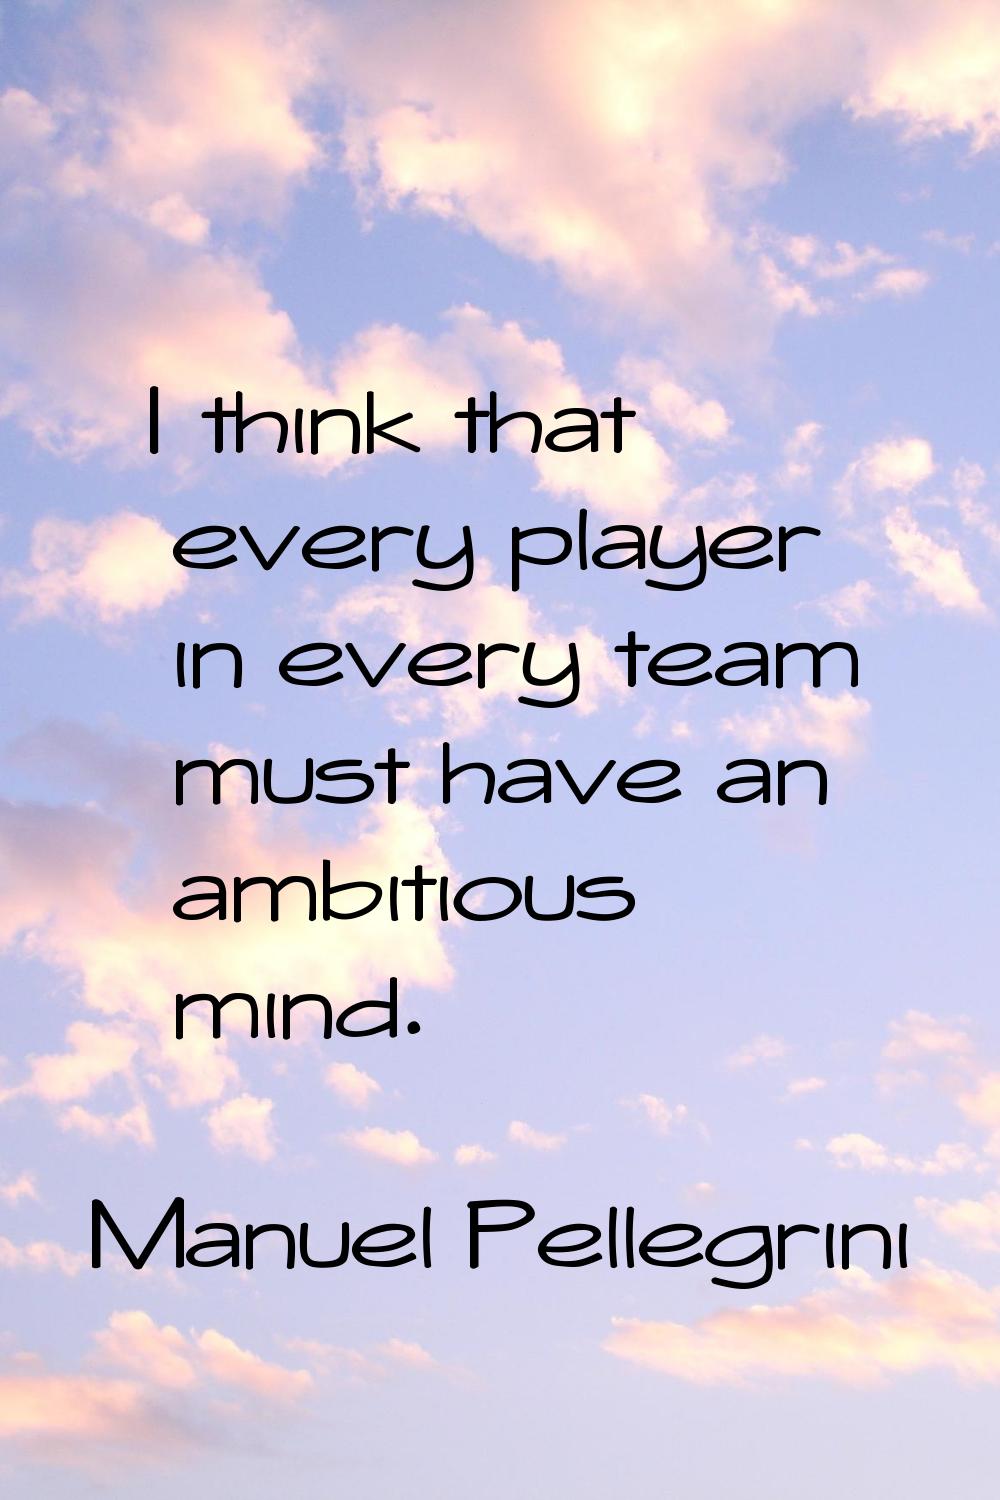 I think that every player in every team must have an ambitious mind.